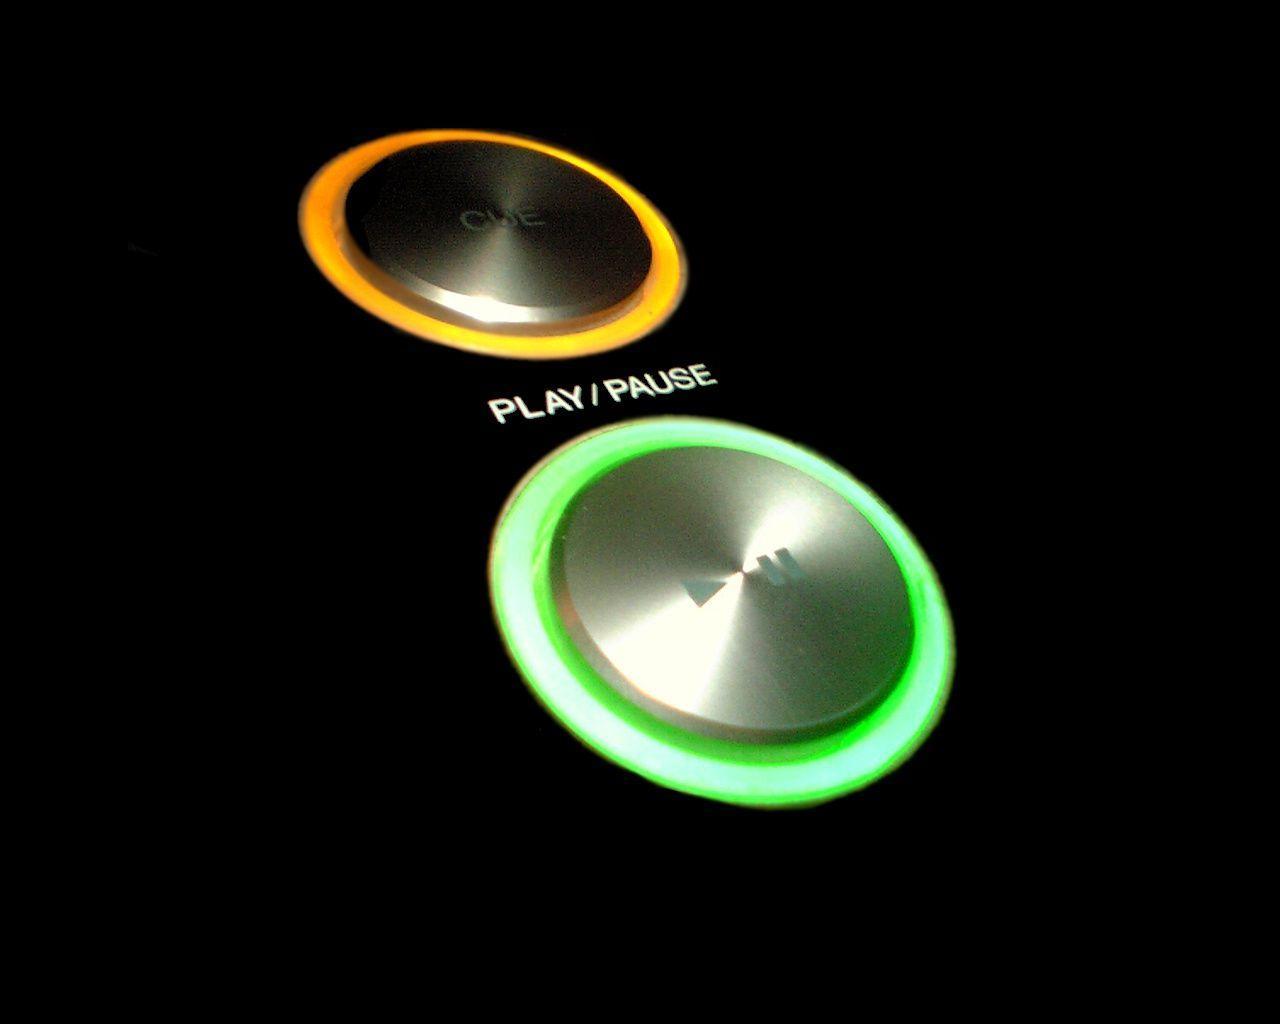 Dj power, play or pause button backgrounds in 1280x1024 resolution